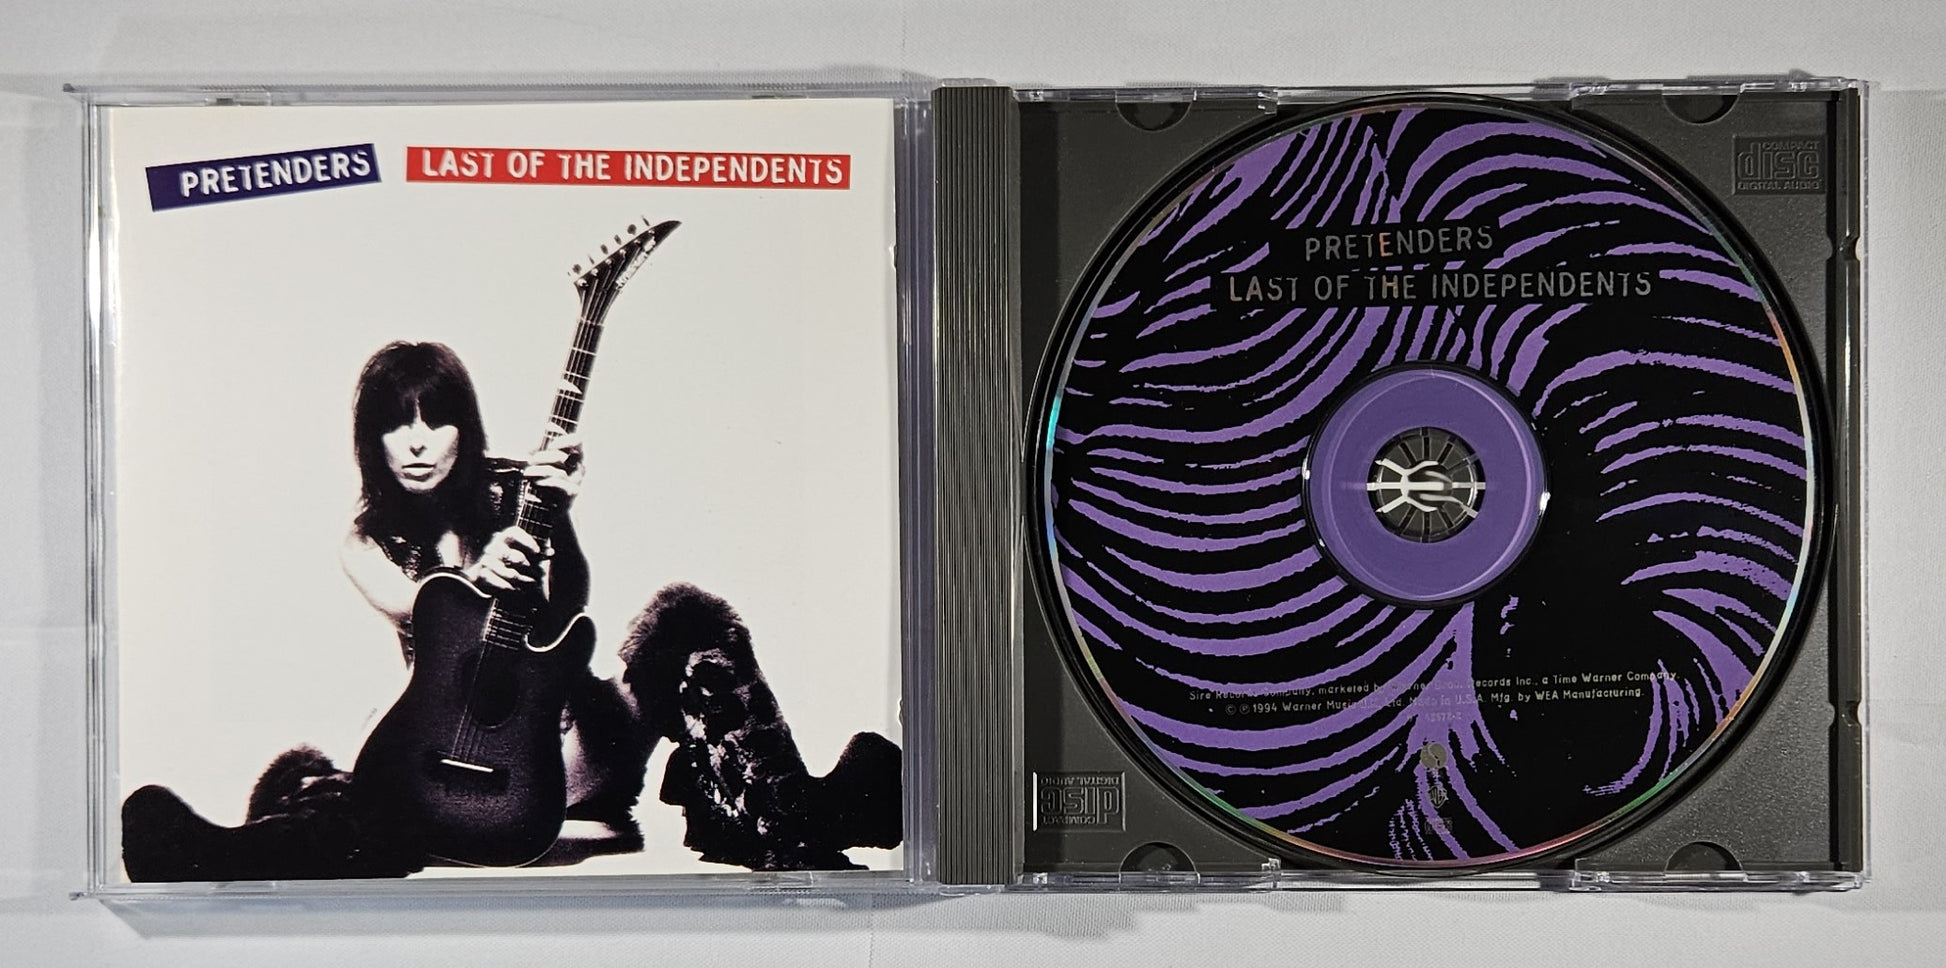 Pretenders - Last of the Independents [1994 Used CD] [B]